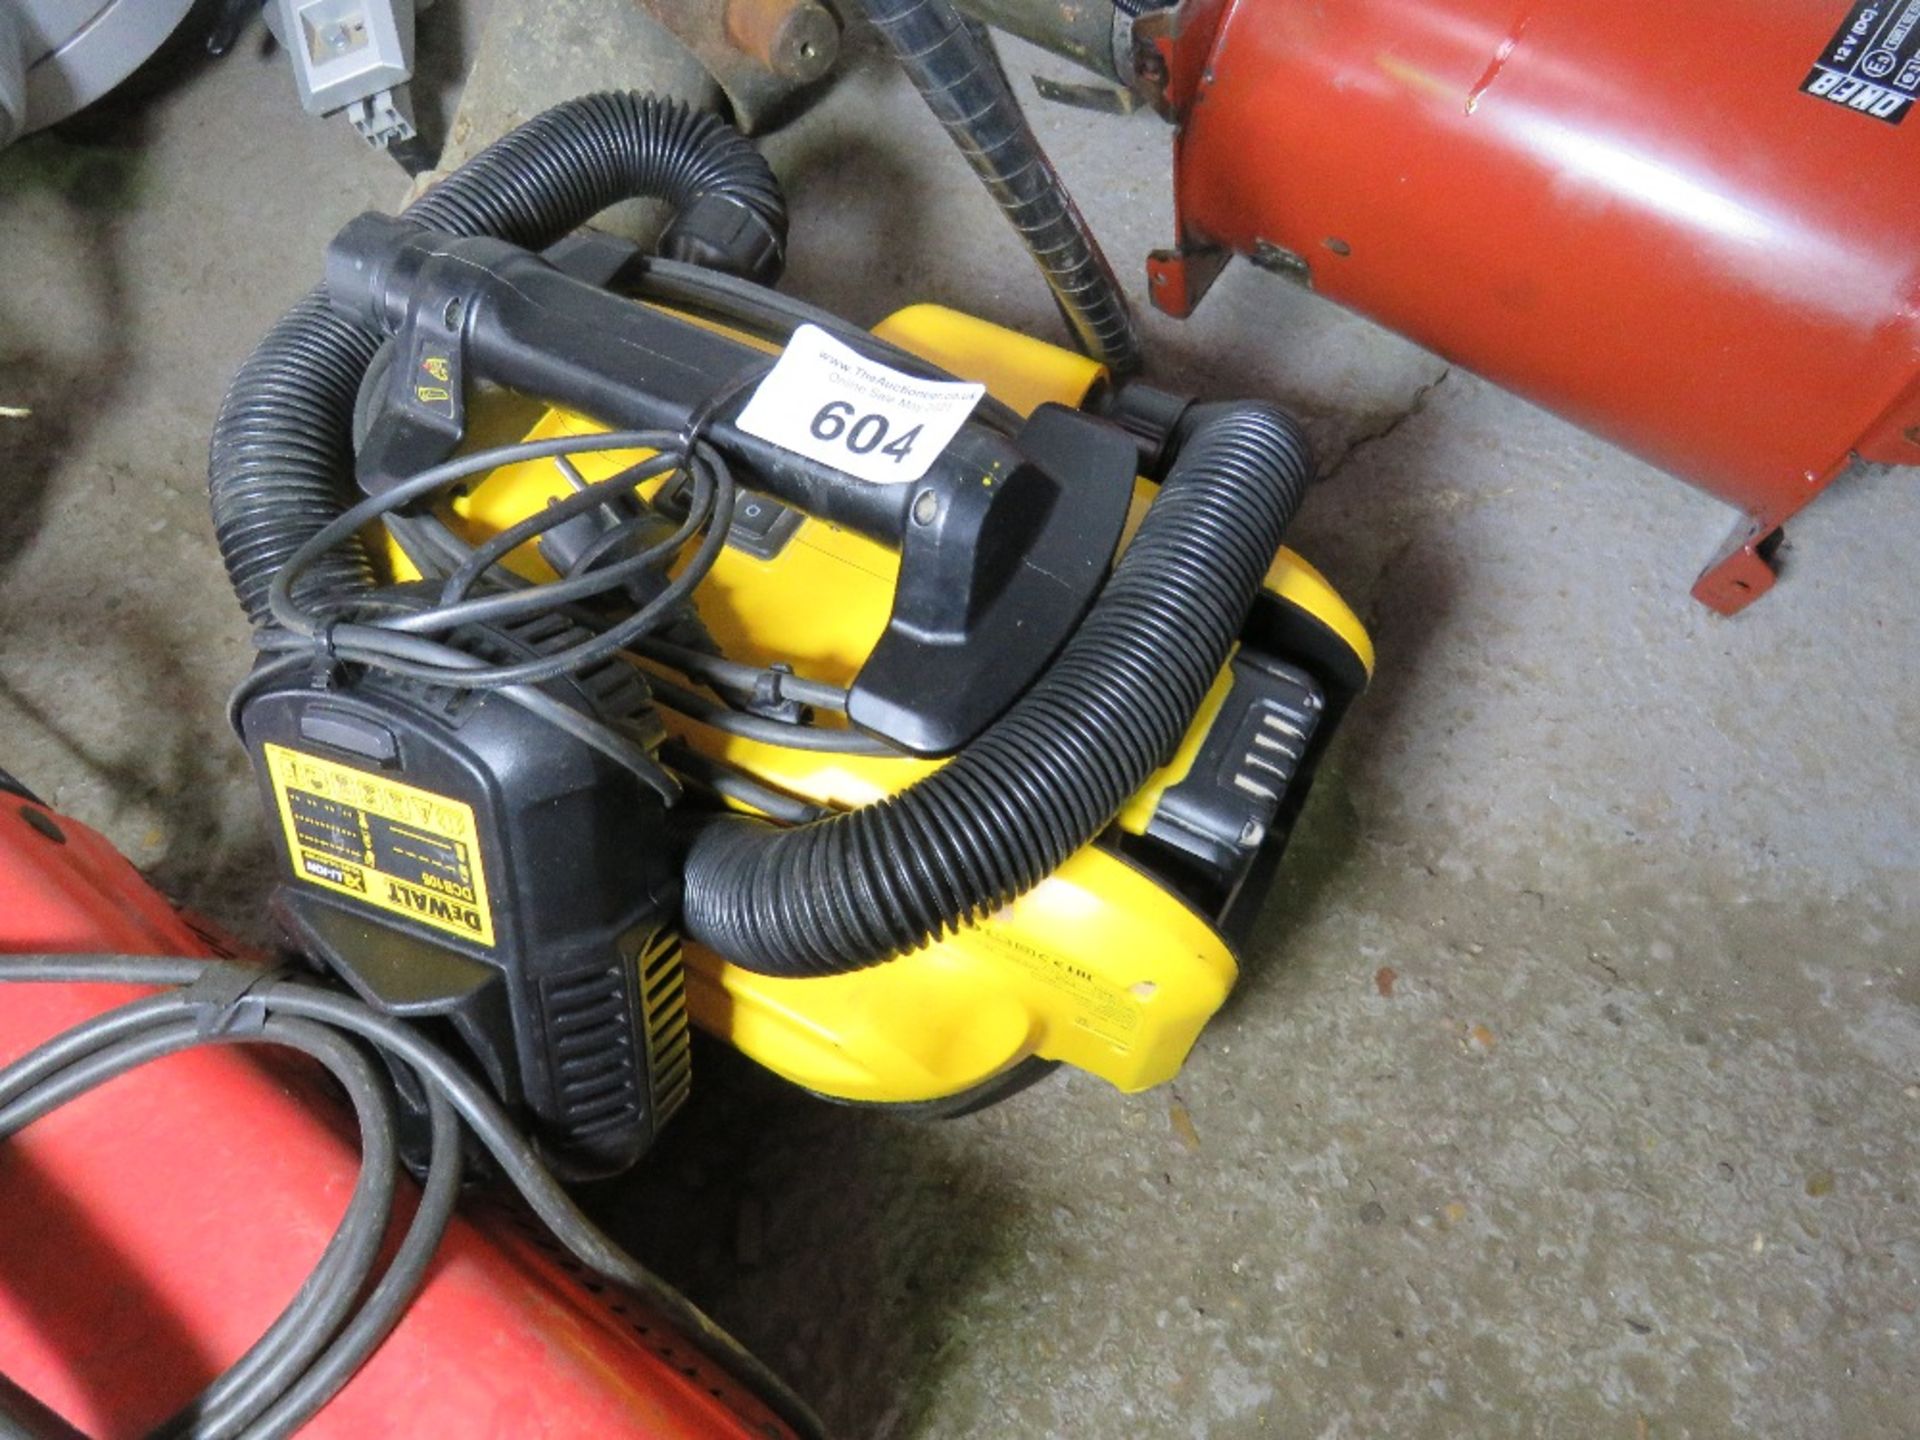 DEWALT BATTERY VAC UNIT. WHEN TESTED WAS SEEN TO RUN AND SUCK.